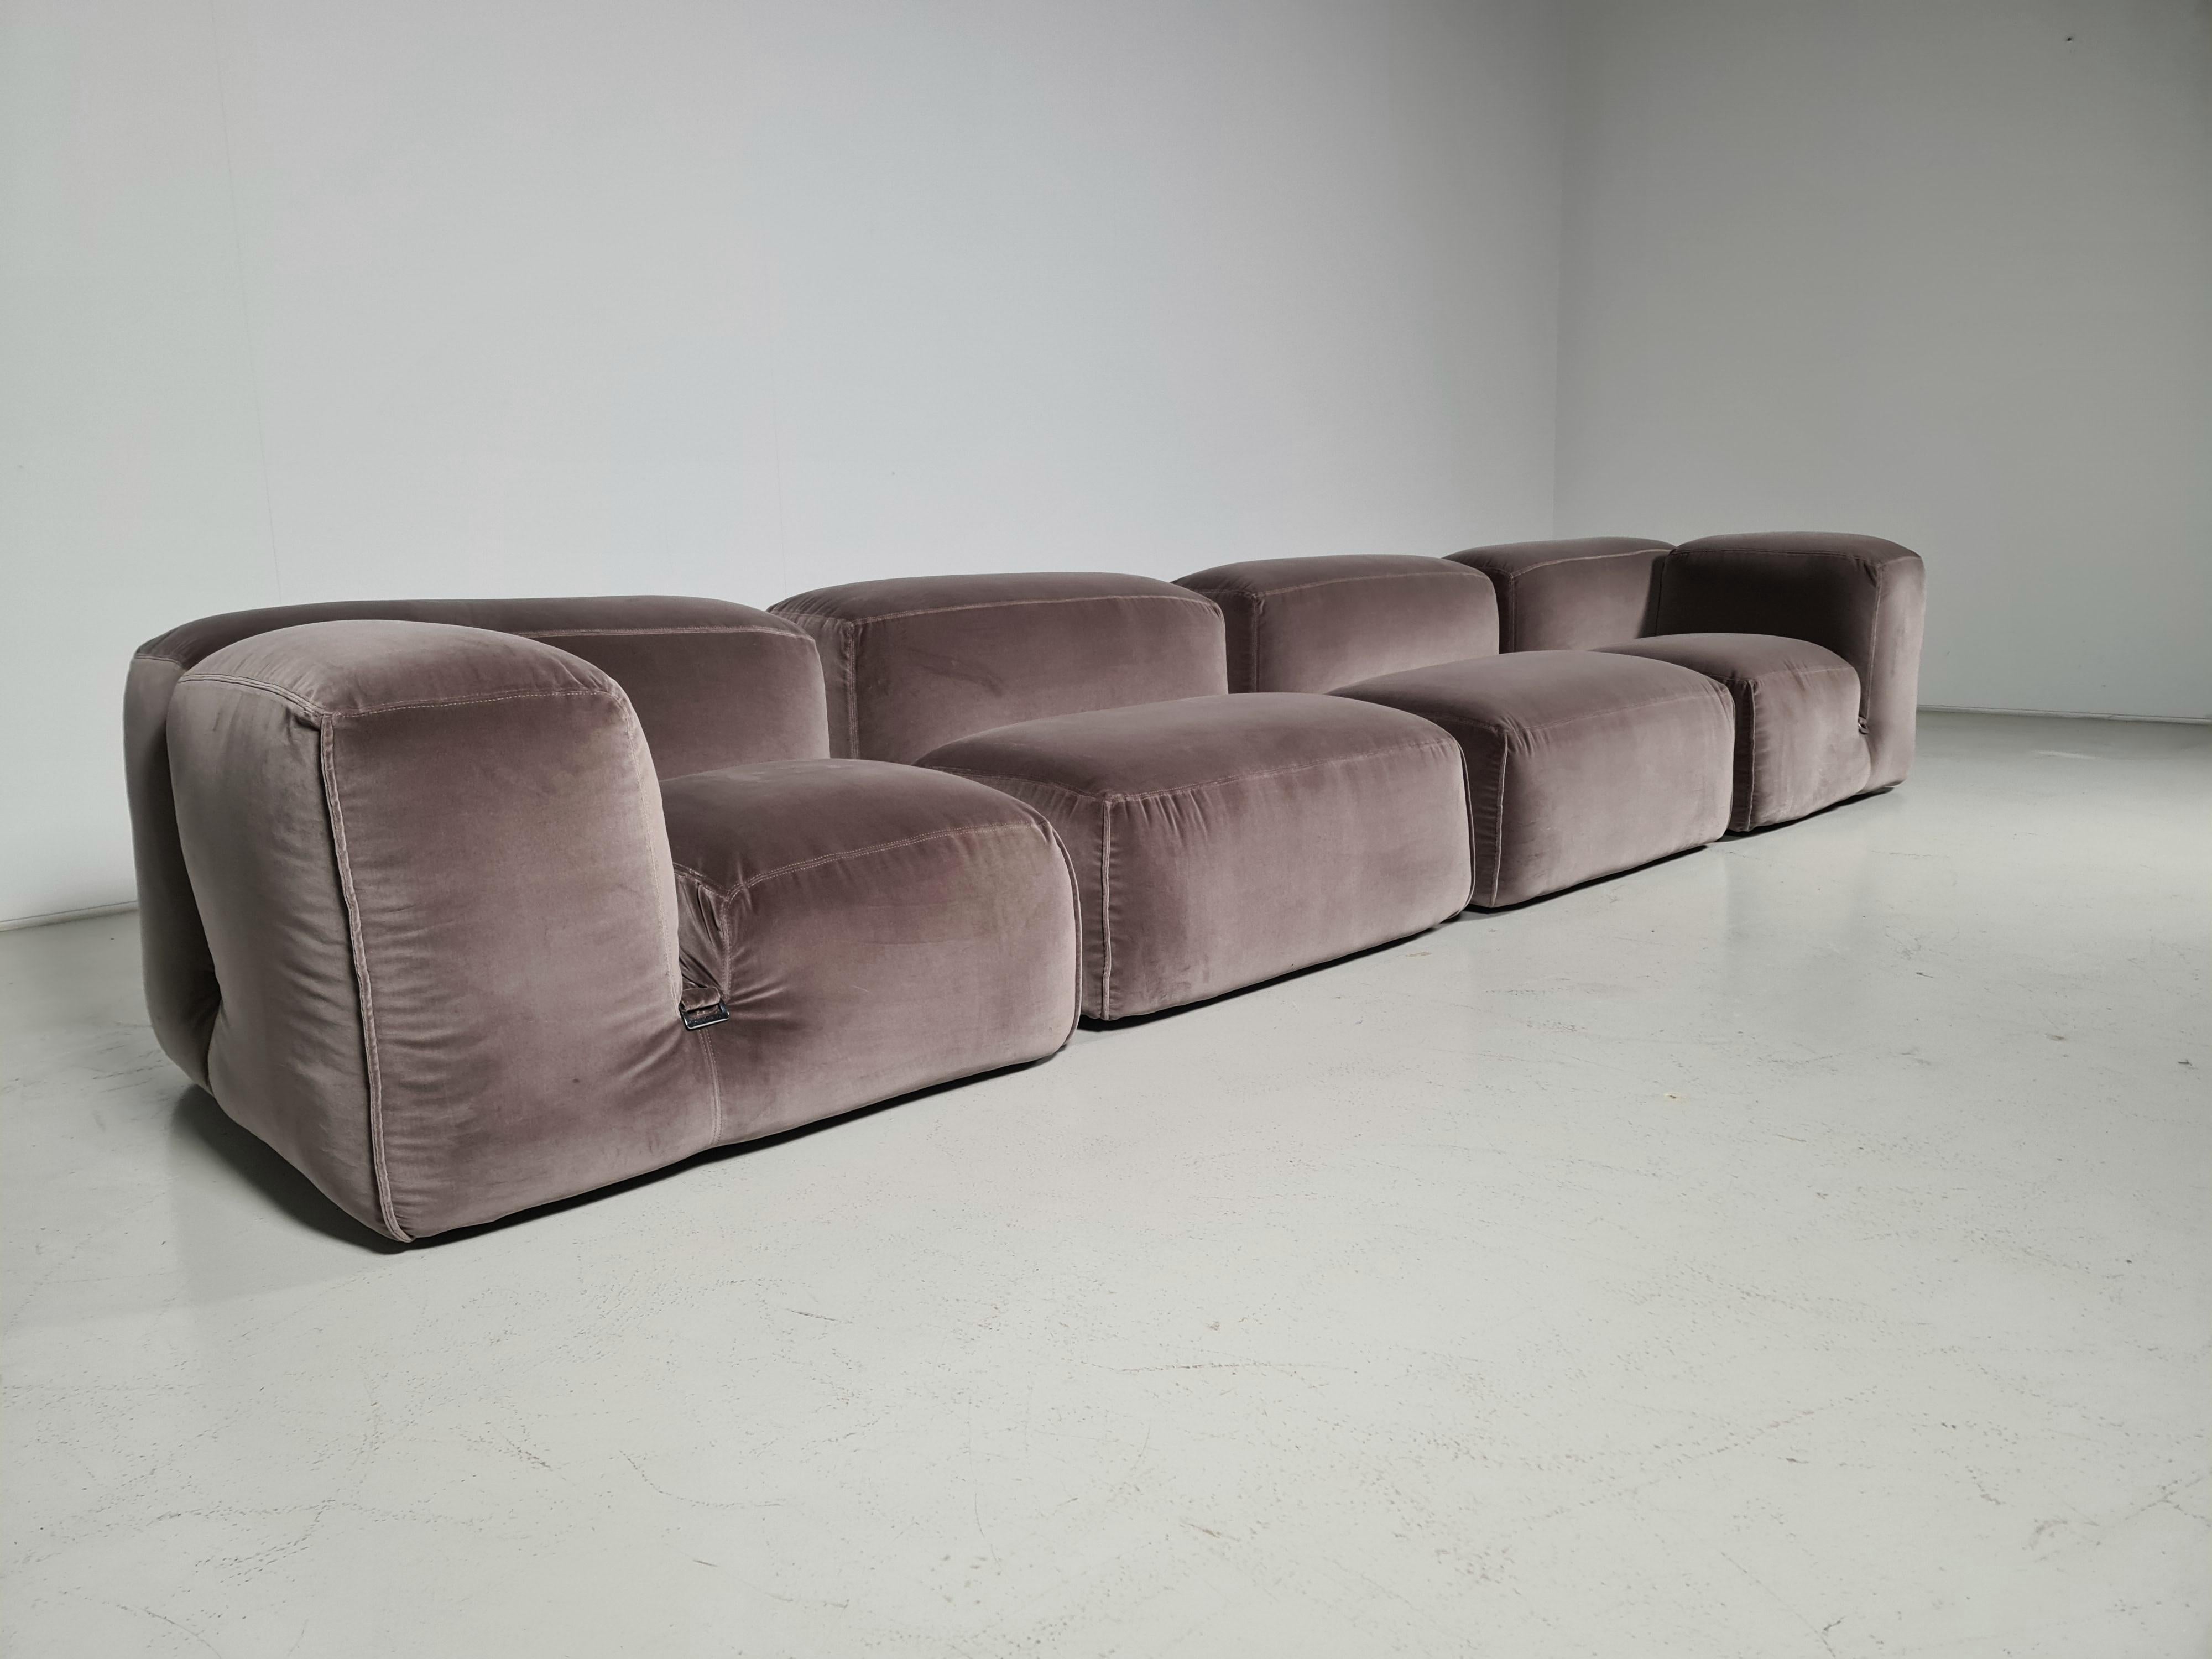 Le Mura 4-Seater Sofa in beige/grey velvet by Mario Bellini for Cassina, 1970s In Excellent Condition For Sale In amstelveen, NL